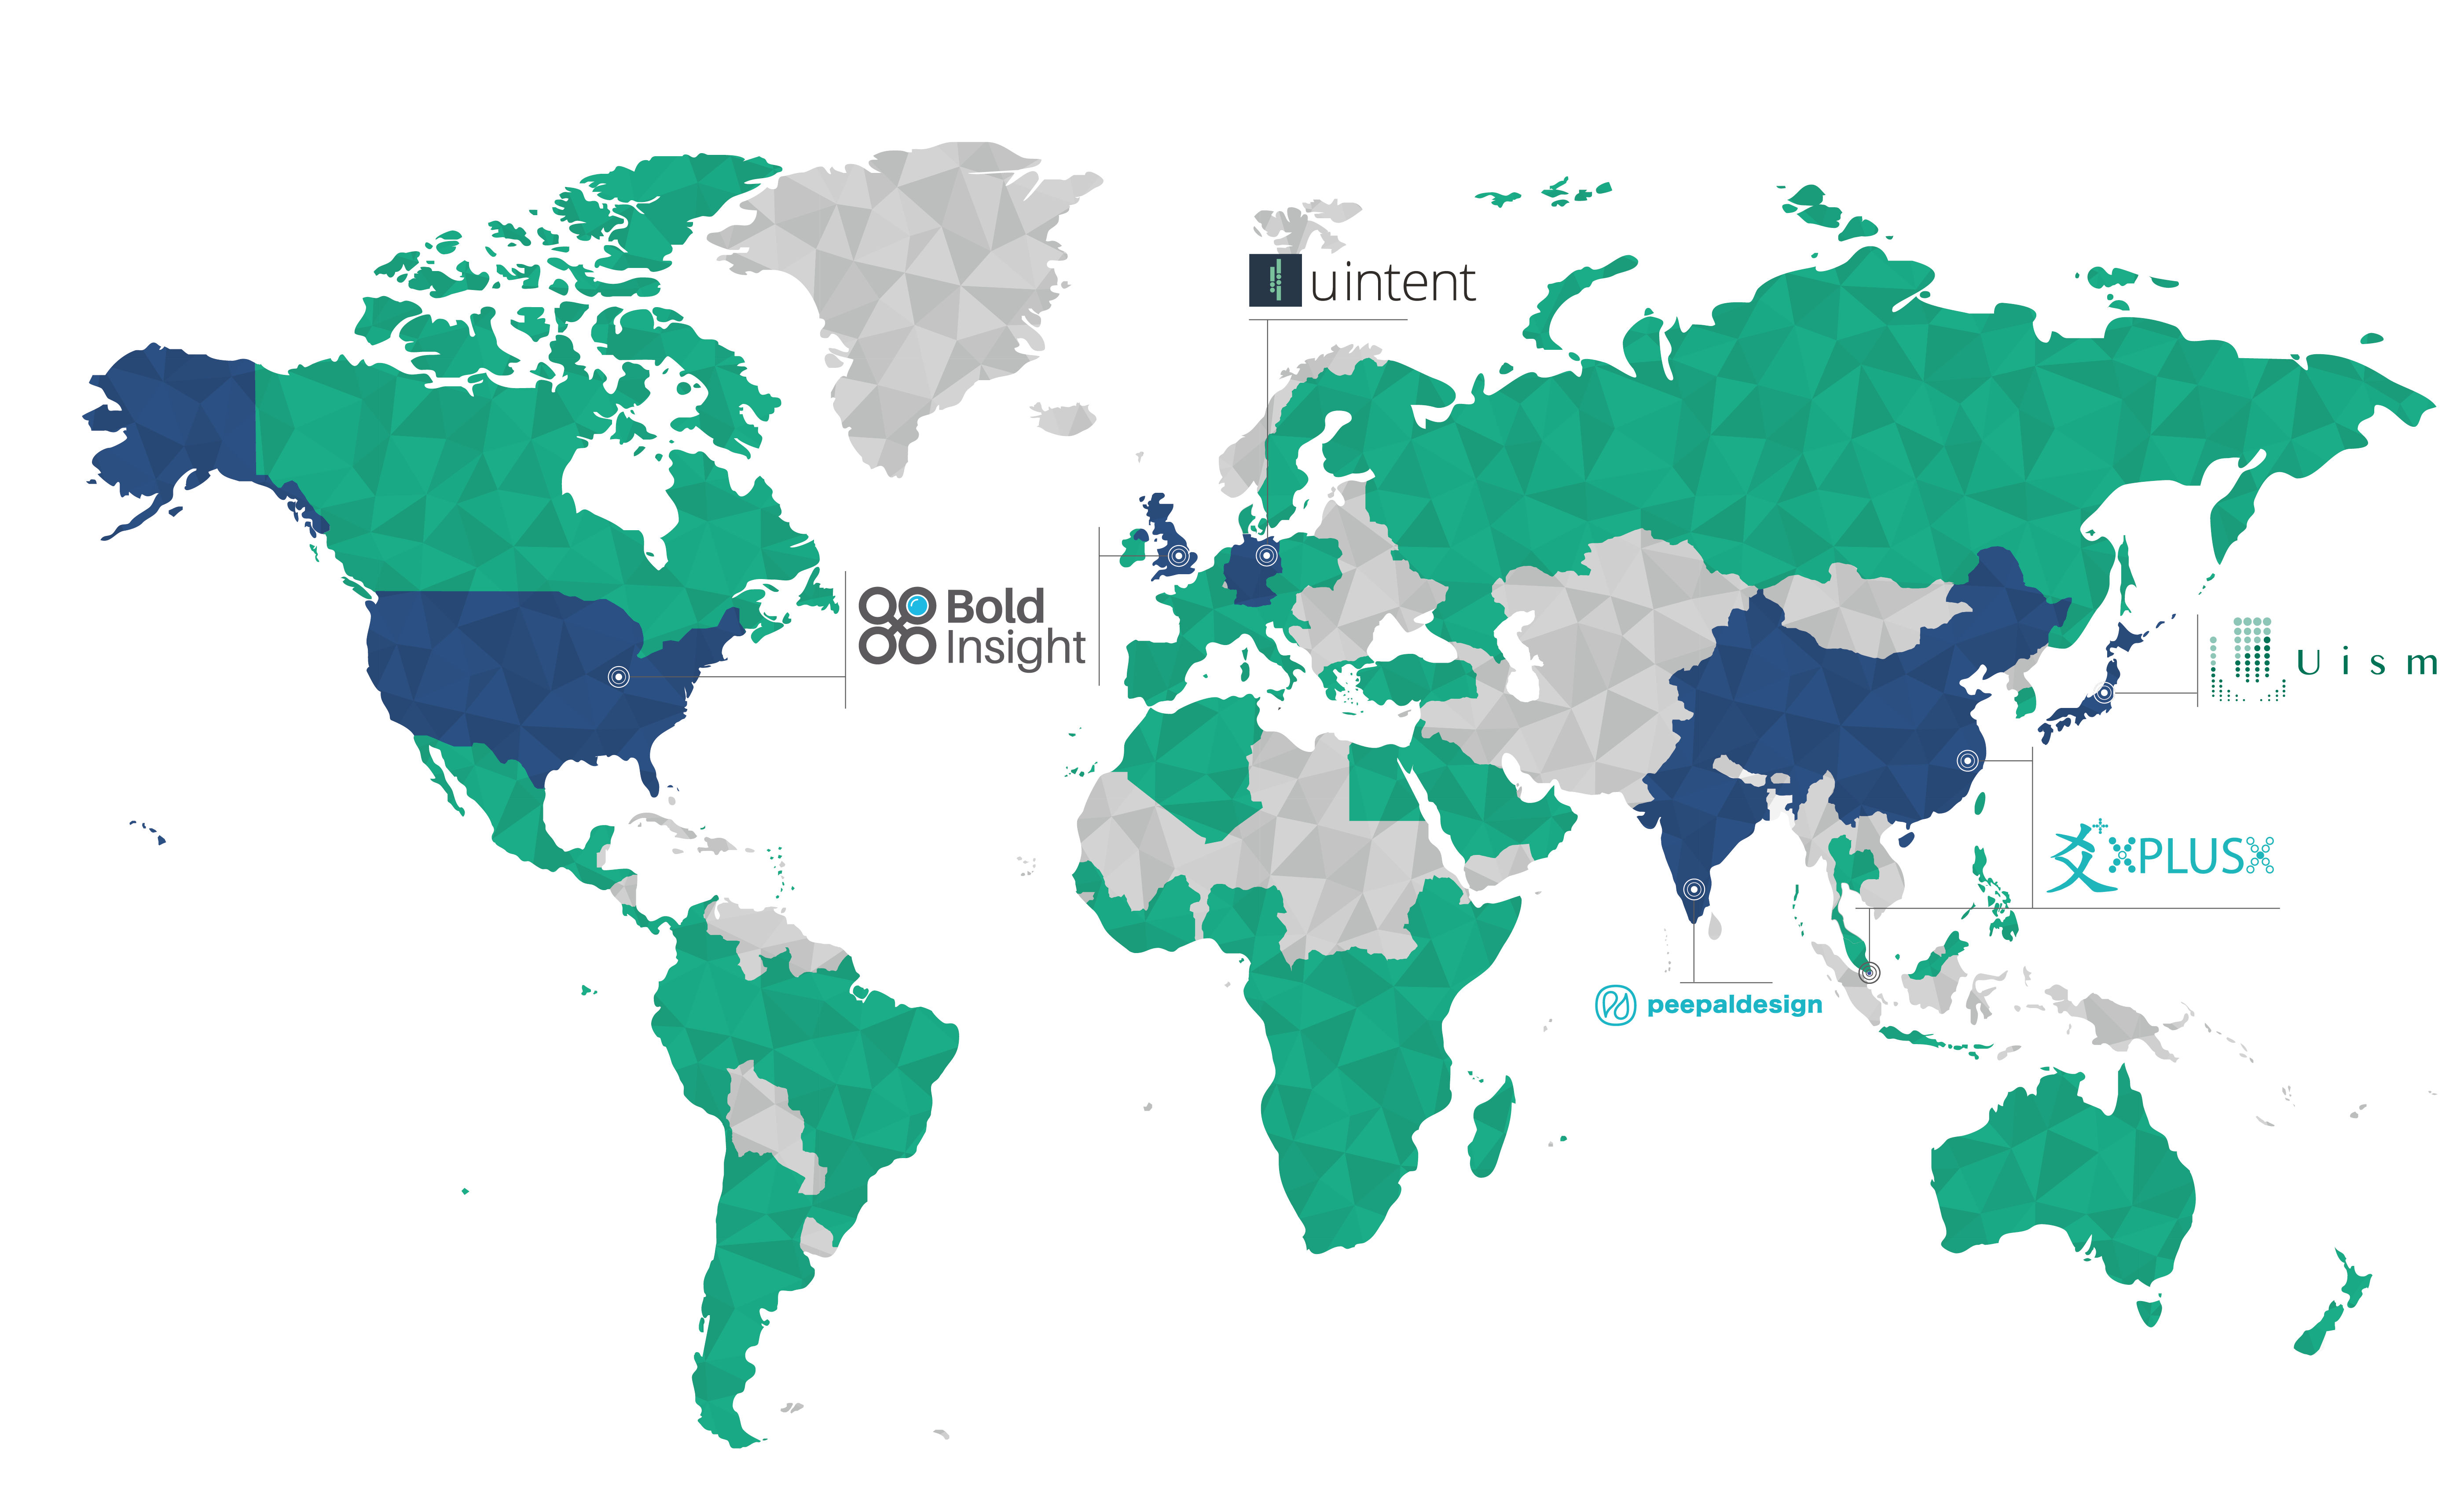 world map with resight global company countries highlighted in blue and ux alliance company countries highlighted in green